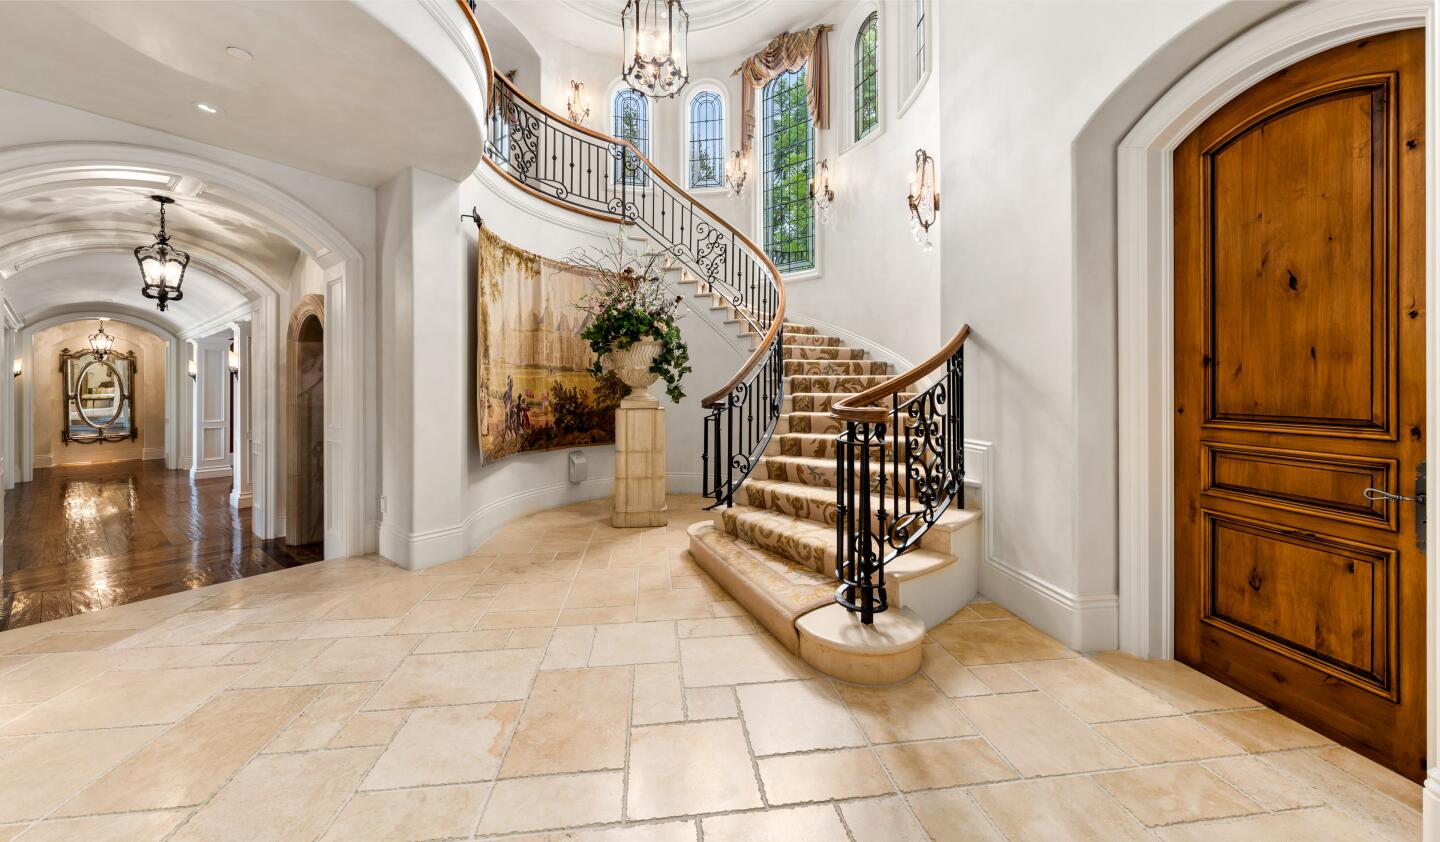 The white foyer leads to a staircase and a hallway.